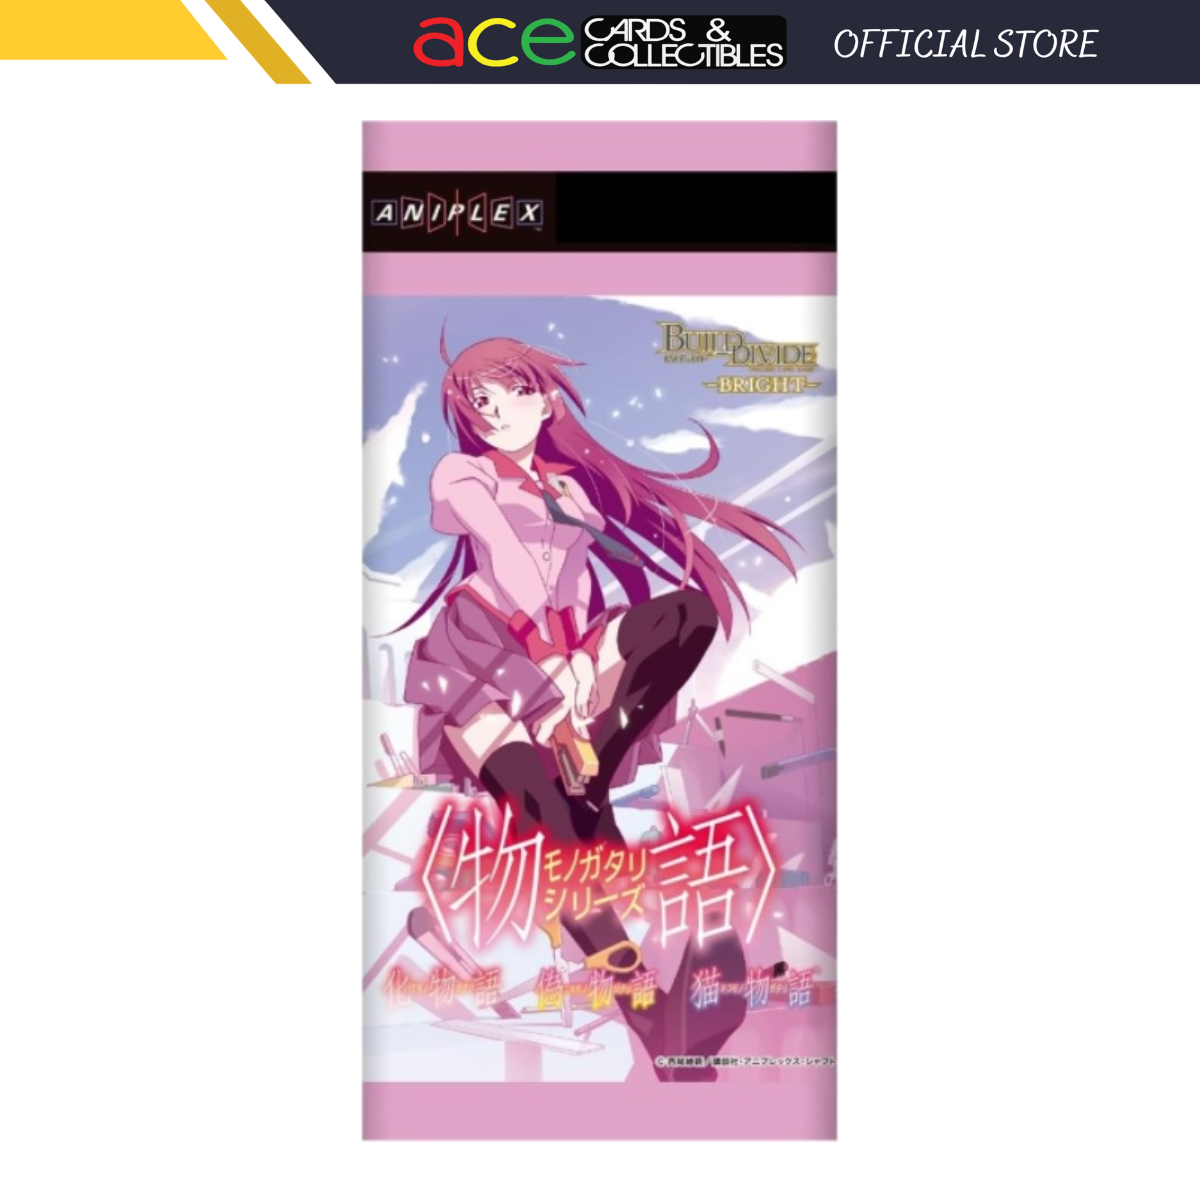 Build Divide -Bright- Booster "Monogatari" (Japanese)-Booster Pack-Aniplex-Ace Cards & Collectibles